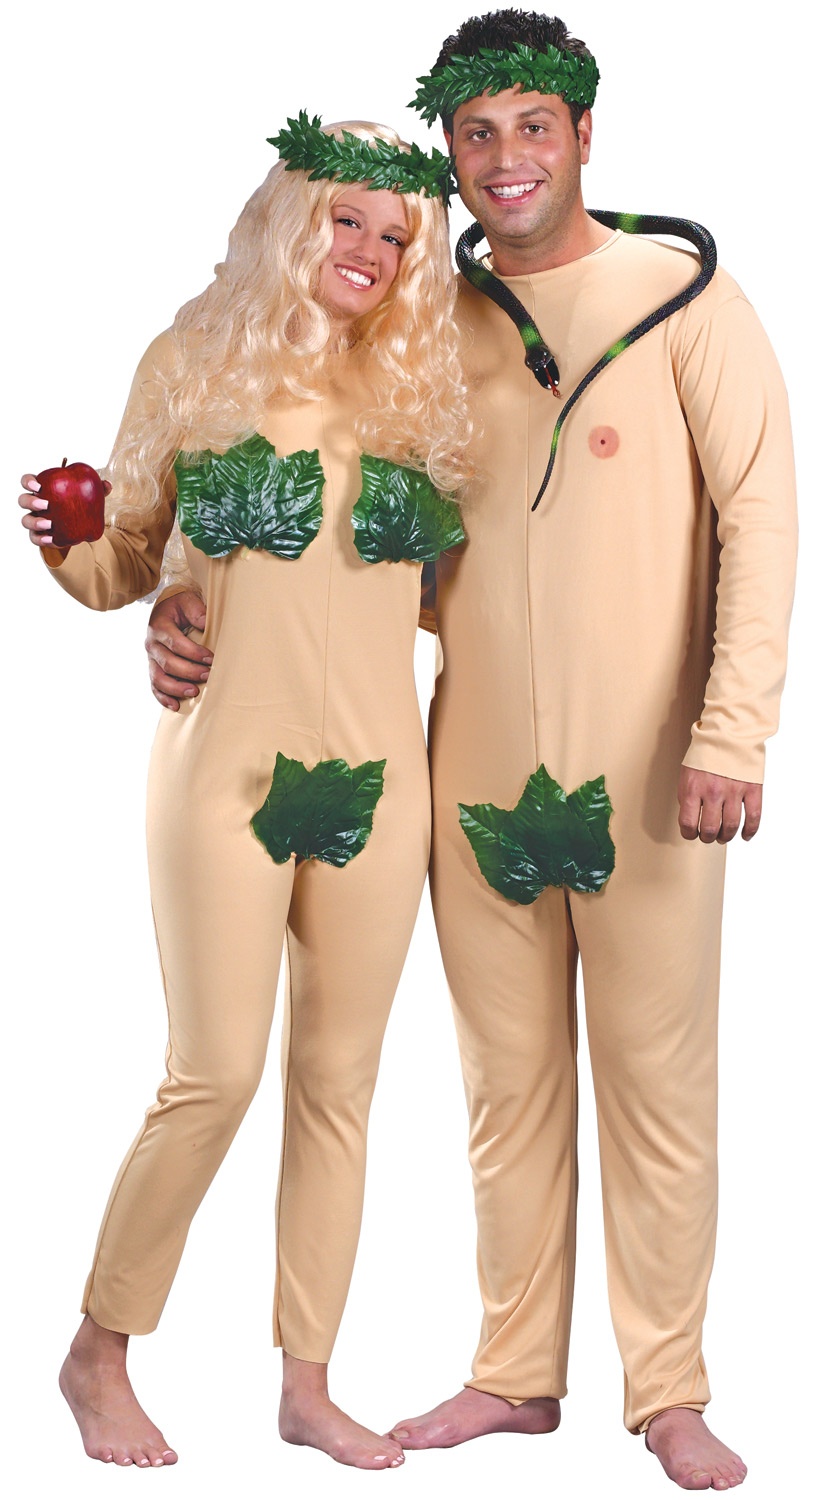 funny adult pictures. Adam and Eve Funny Adult